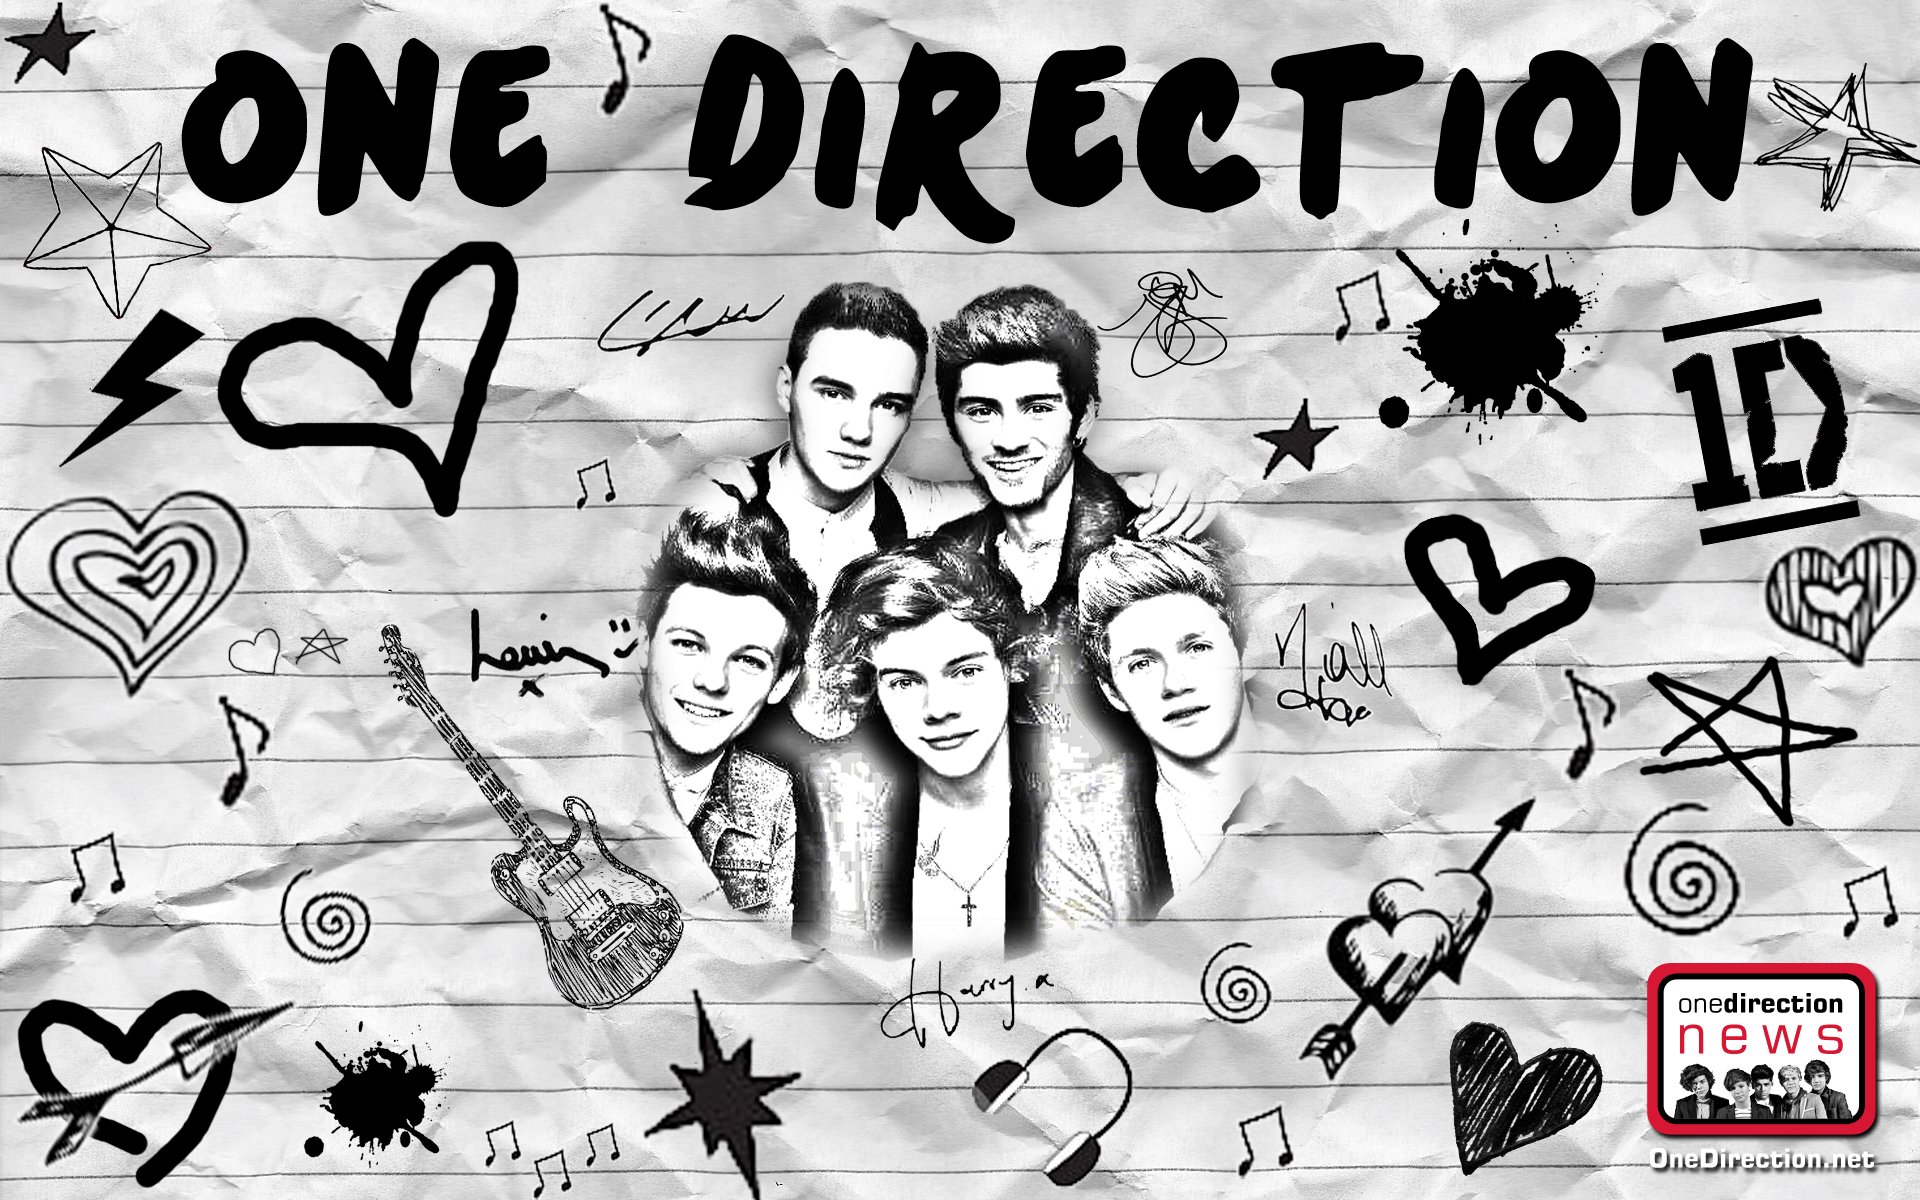 One Direction 2014 Wallpaper For Ipad Image Gallery Picture